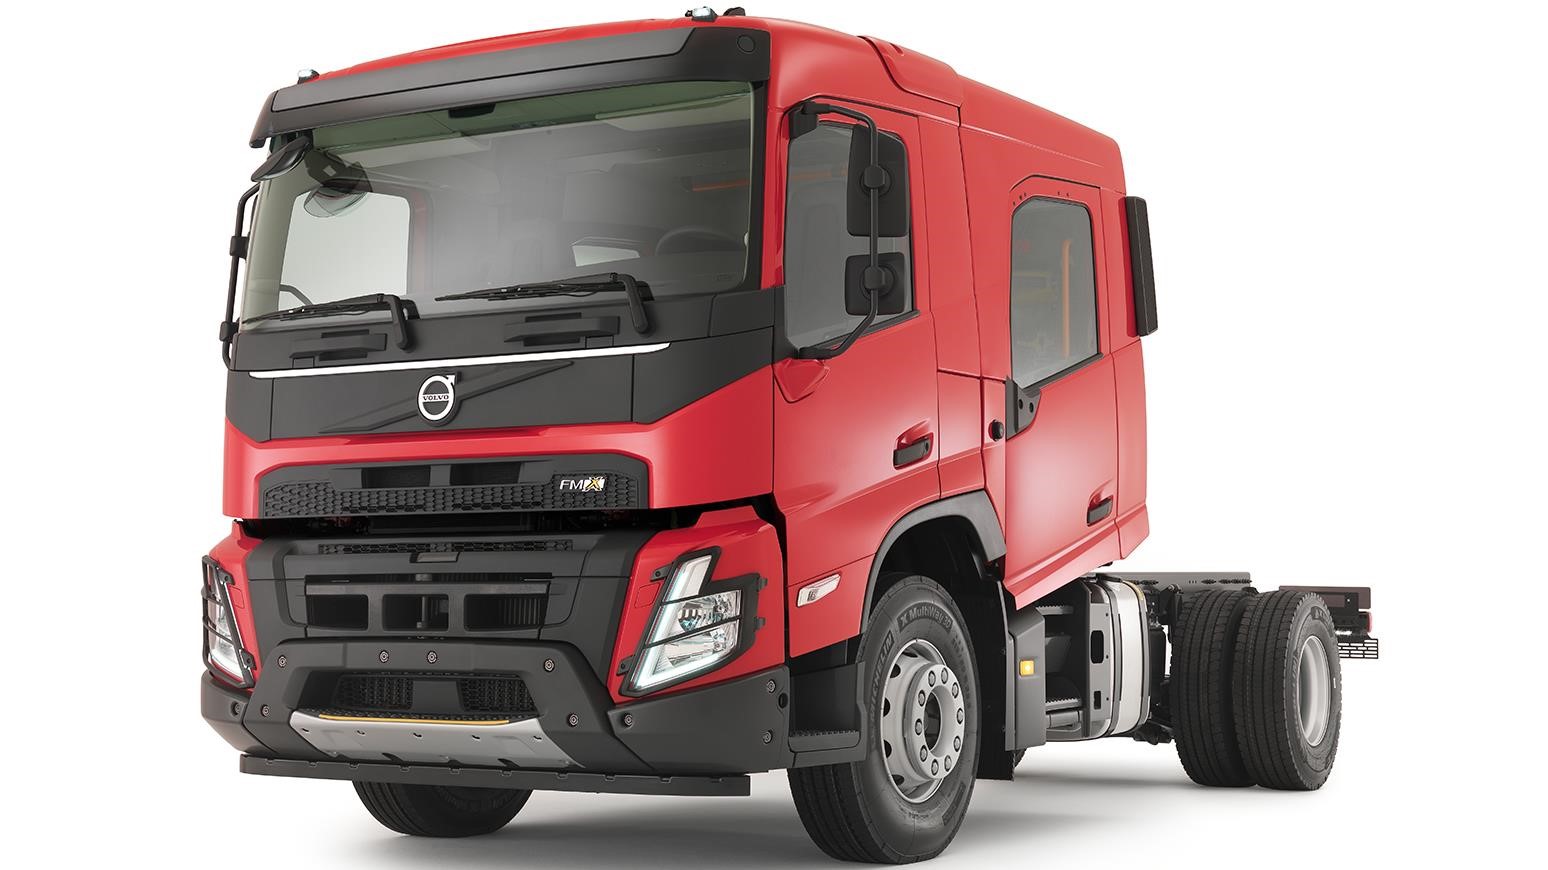 Volvo Introduces New Crew Cab Option For FM & FMX Trucks, Making Them Ideal For Use As Fire Service Trucks